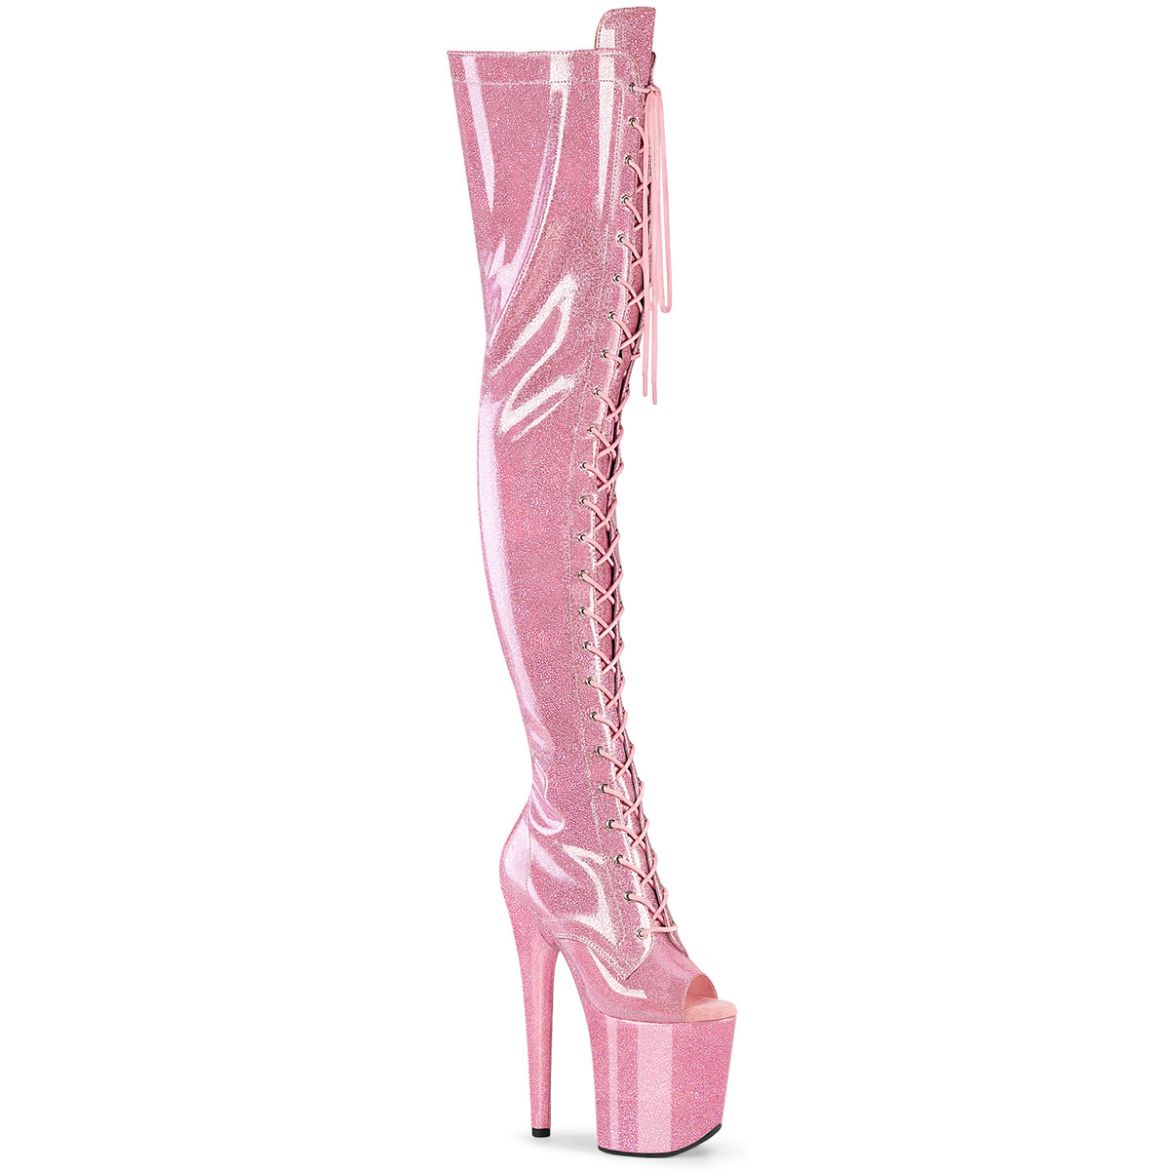 Product image of Pleaser FLAMINGO-3021GP B. Pink Glitter Pat/M 8 Inch Heel 4 Inch PF Peep Toe Lace-Up Thigh Boot Side Zip